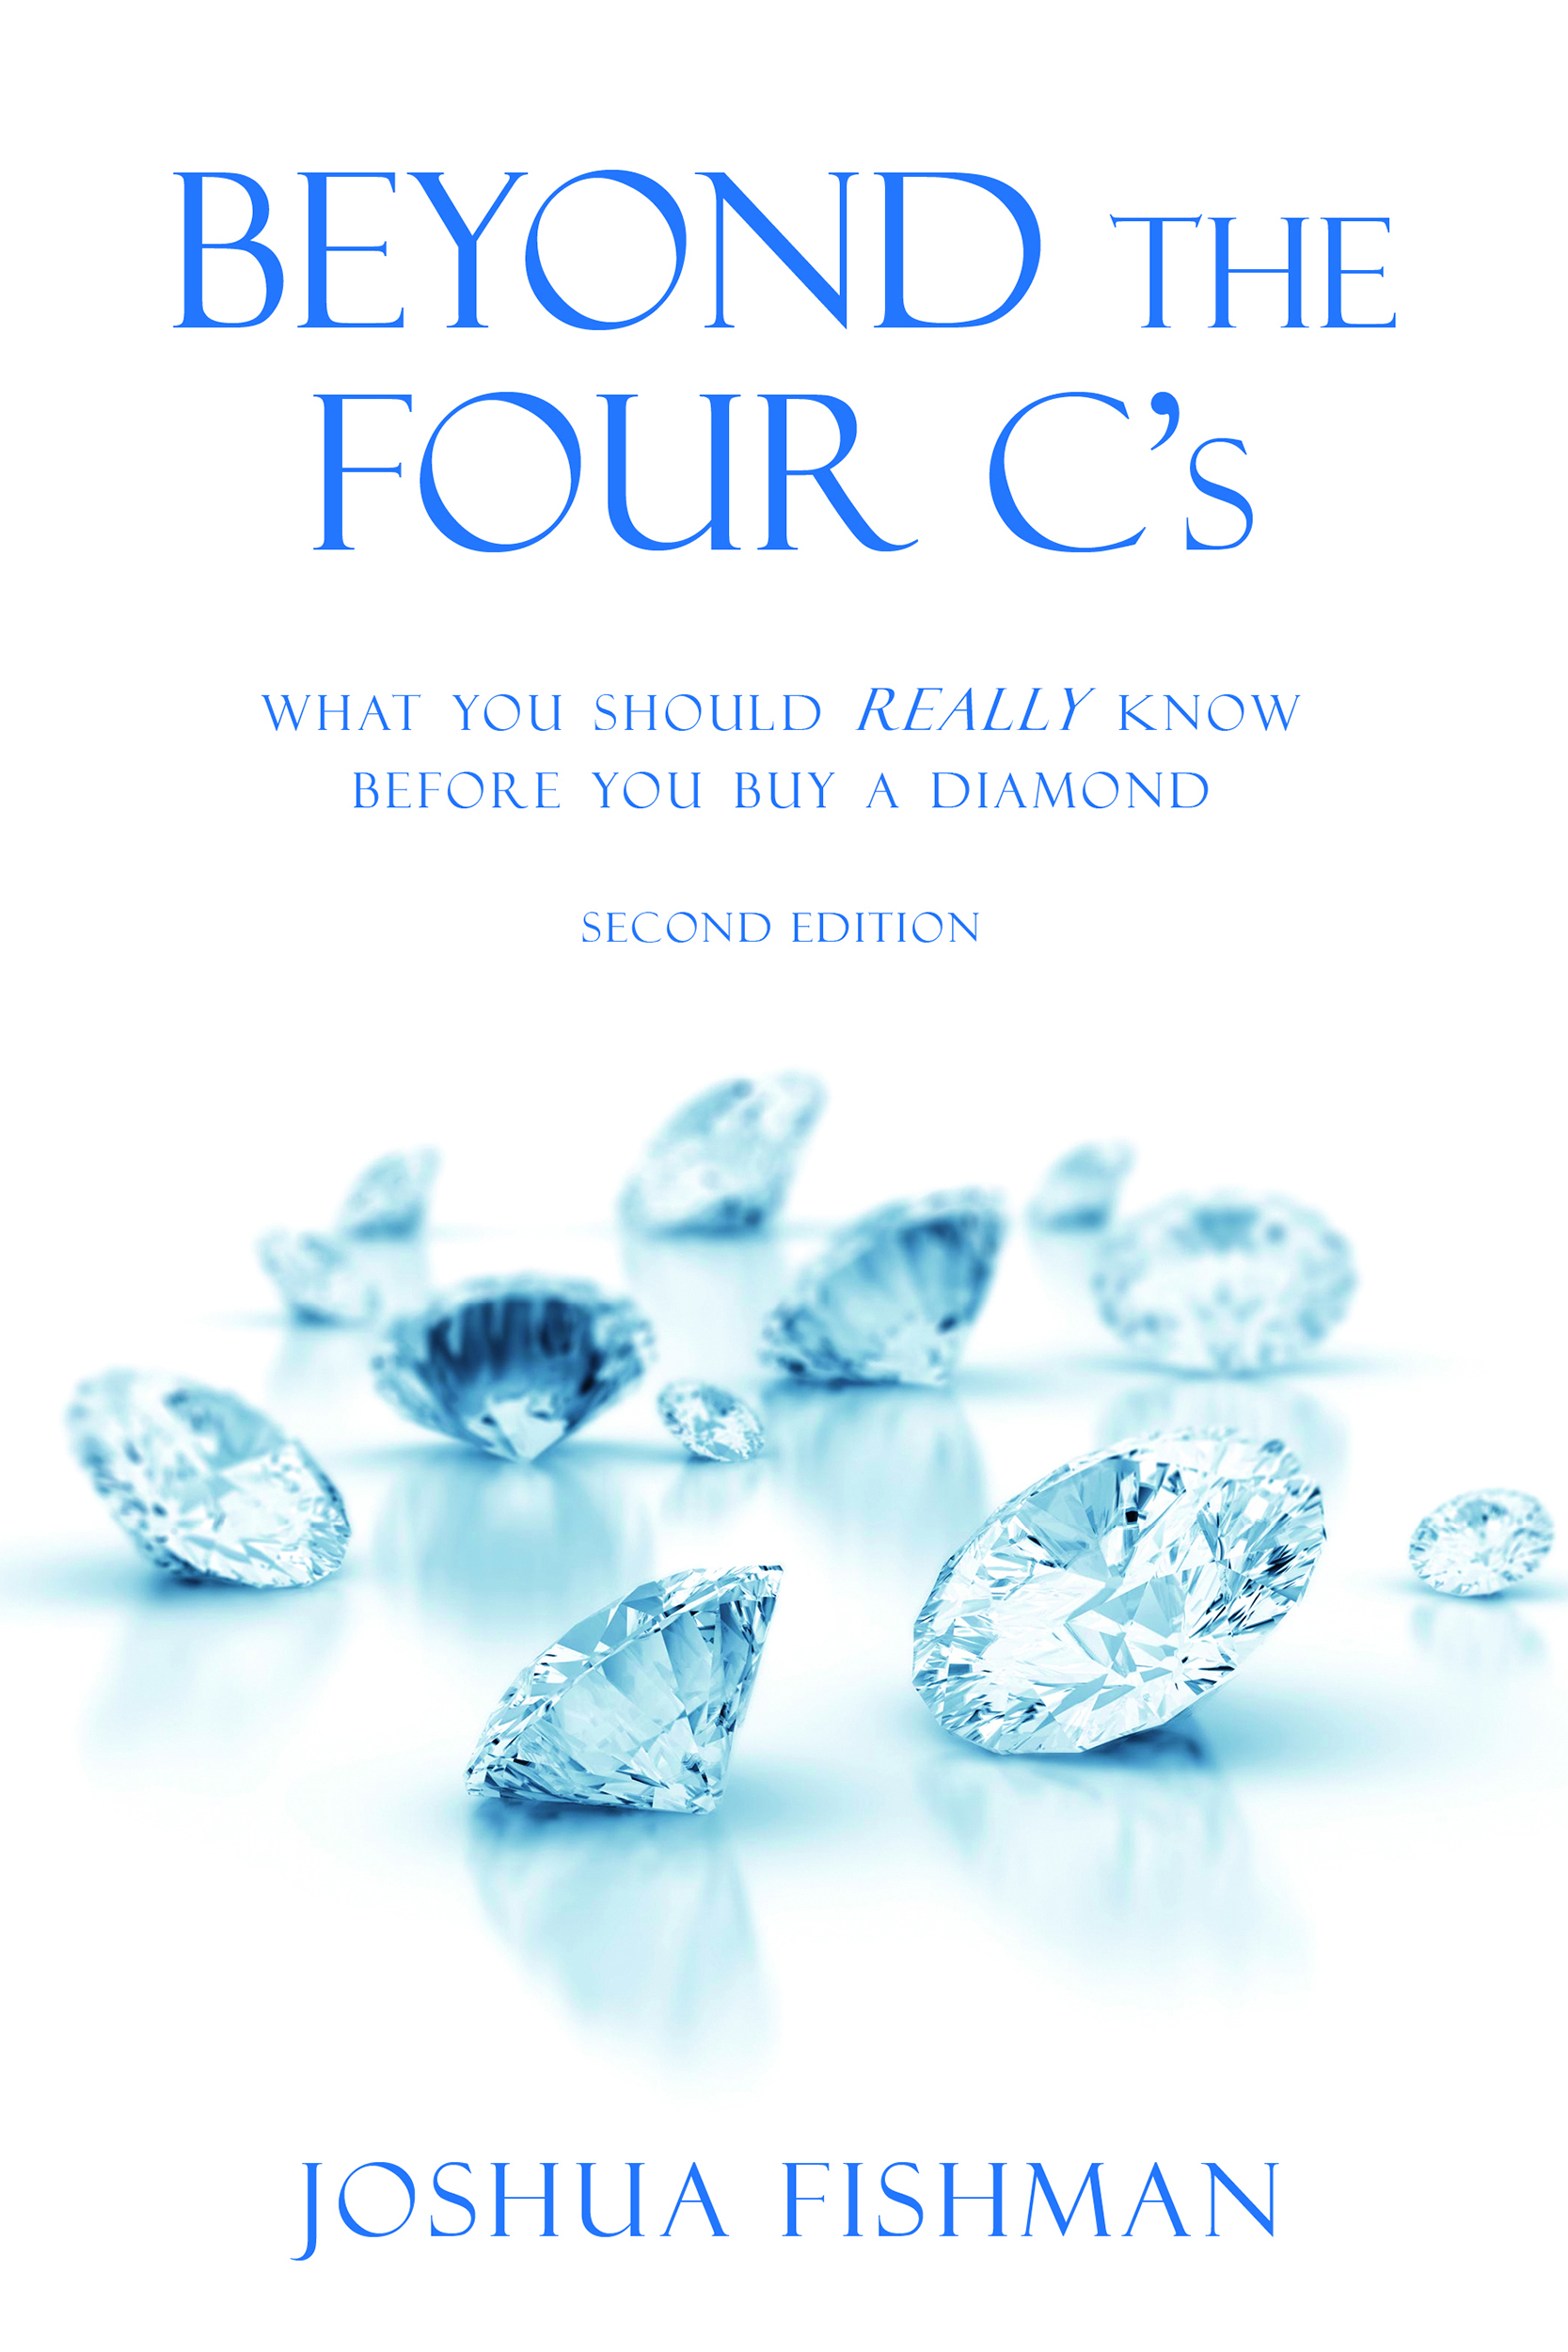 Beyond the Four C's